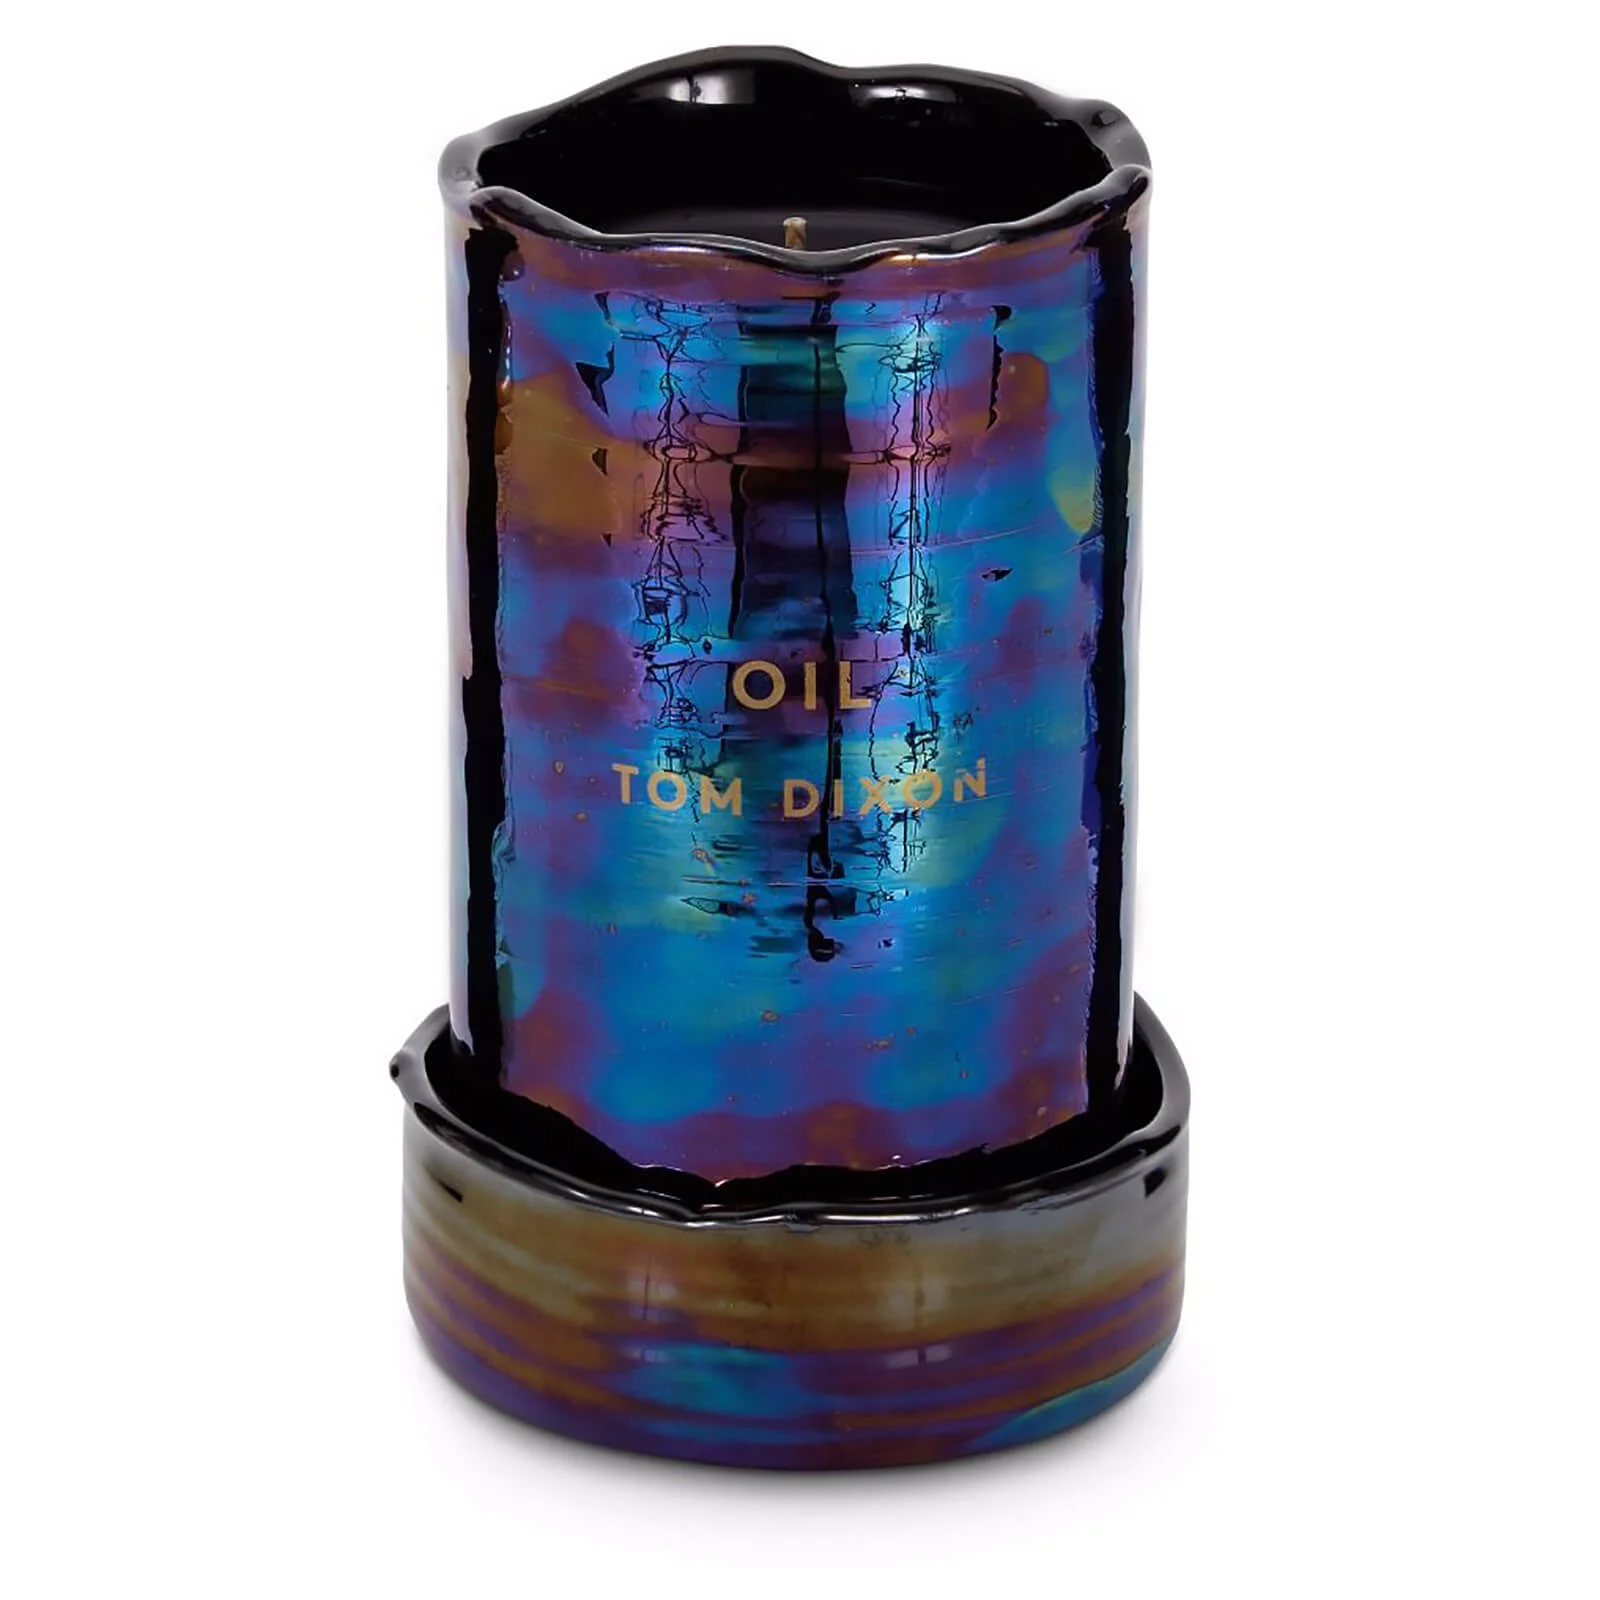 Tom Dixon Oil Candle - Large Image 1